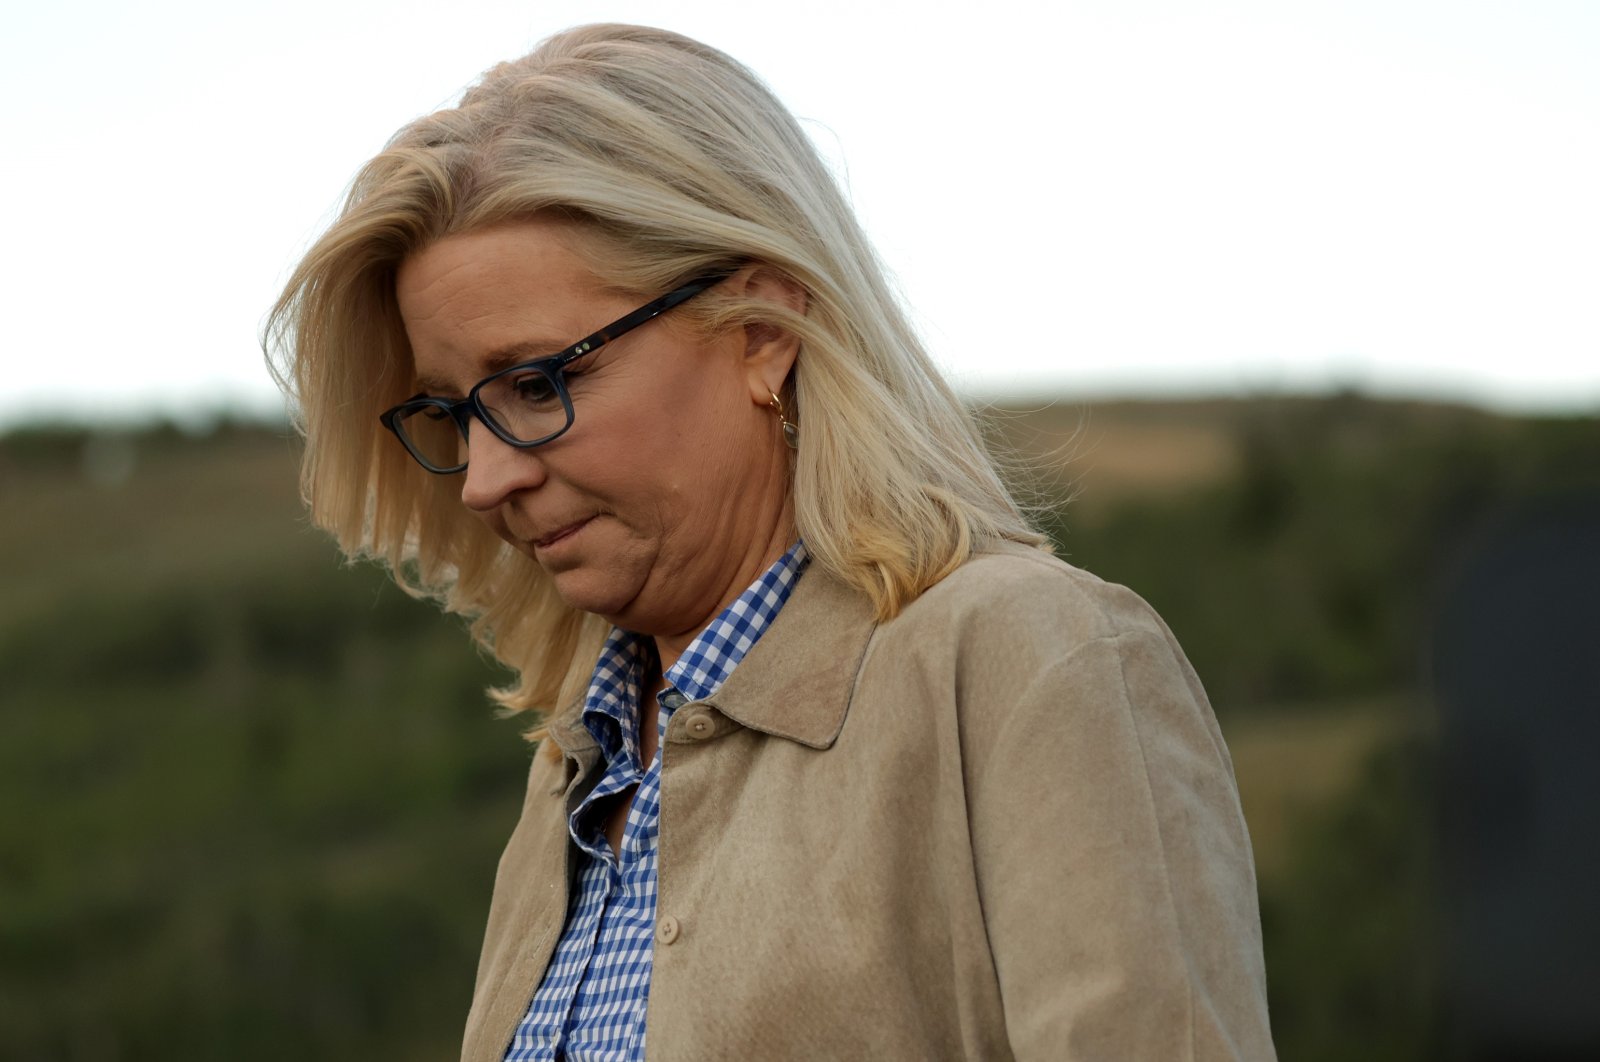 U.S. Rep. Liz Cheney arrives at a primary night event in Jackson, Wyoming, U.S., Aug. 16, 2022. (AFP Photo)